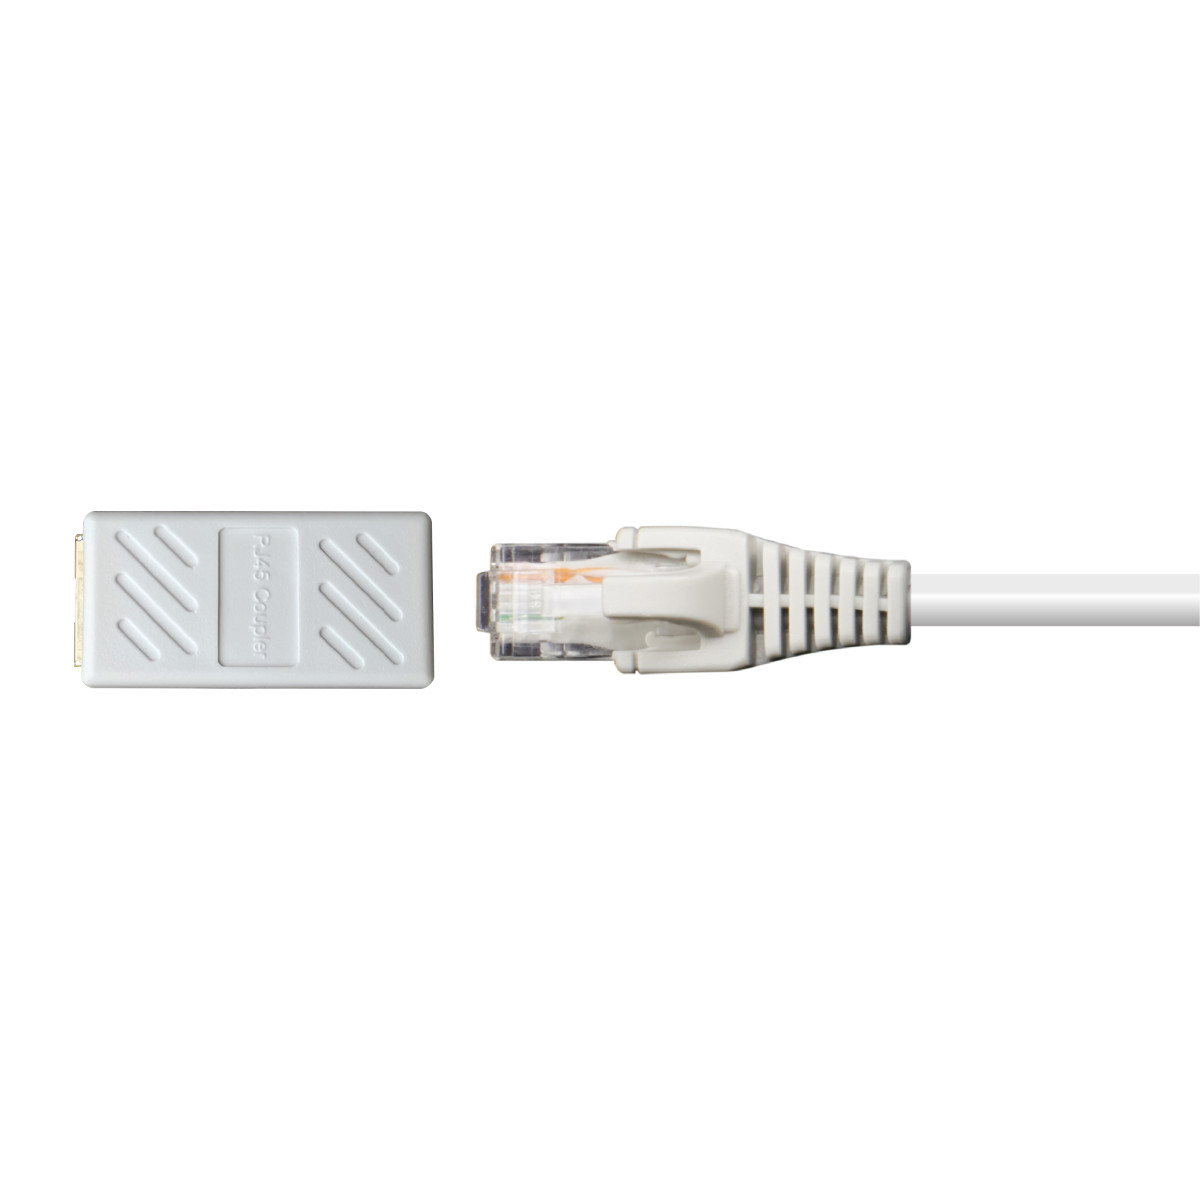 EUK -100ft/30m Network Extension Cable